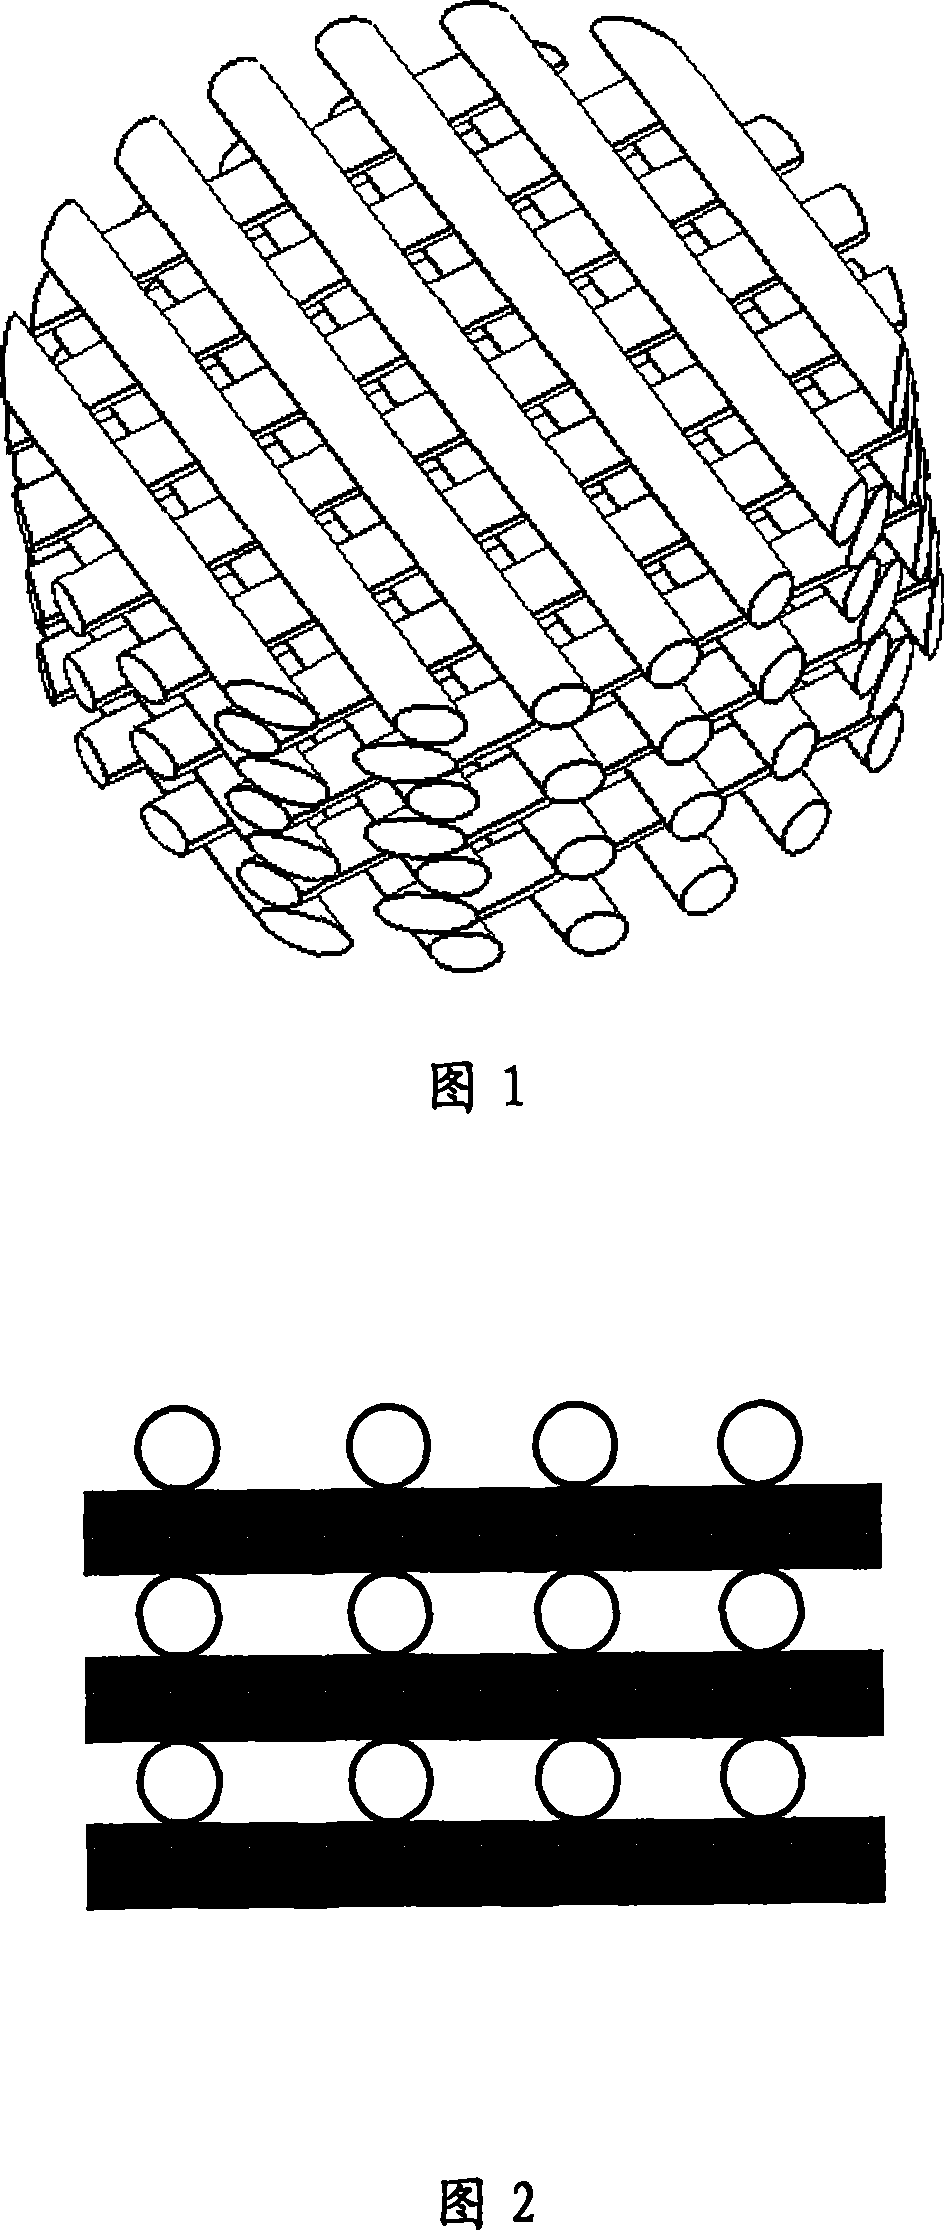 Three dimensional cell culture construct and apparatus for its making